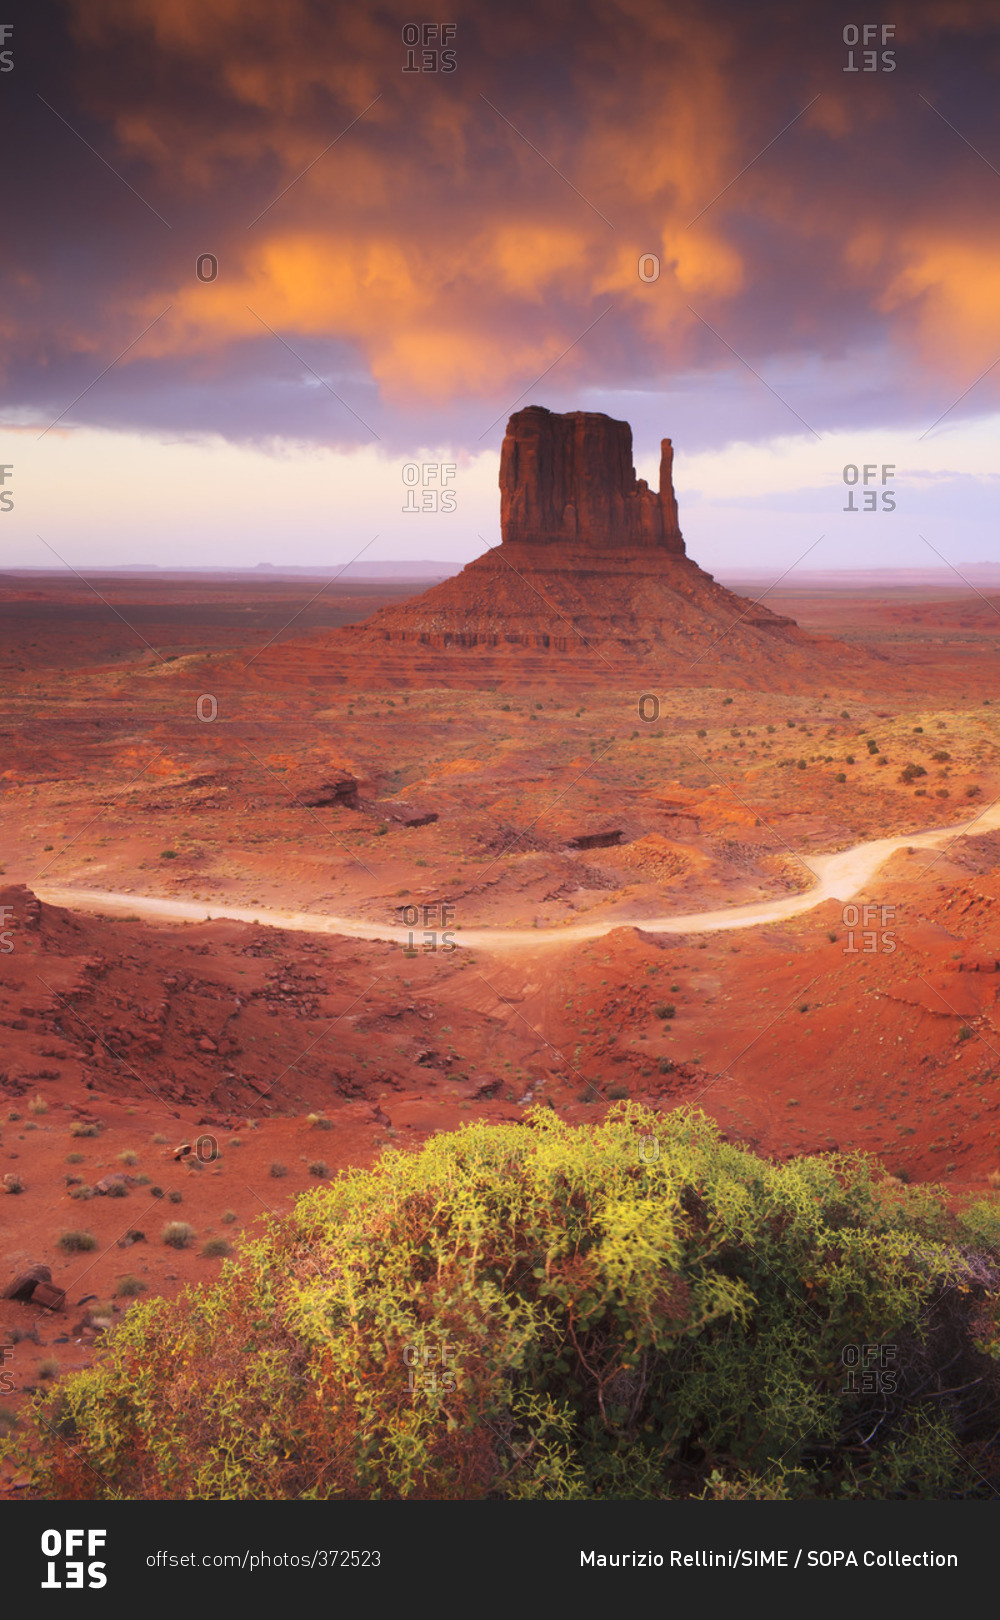 unset in Monument Valley